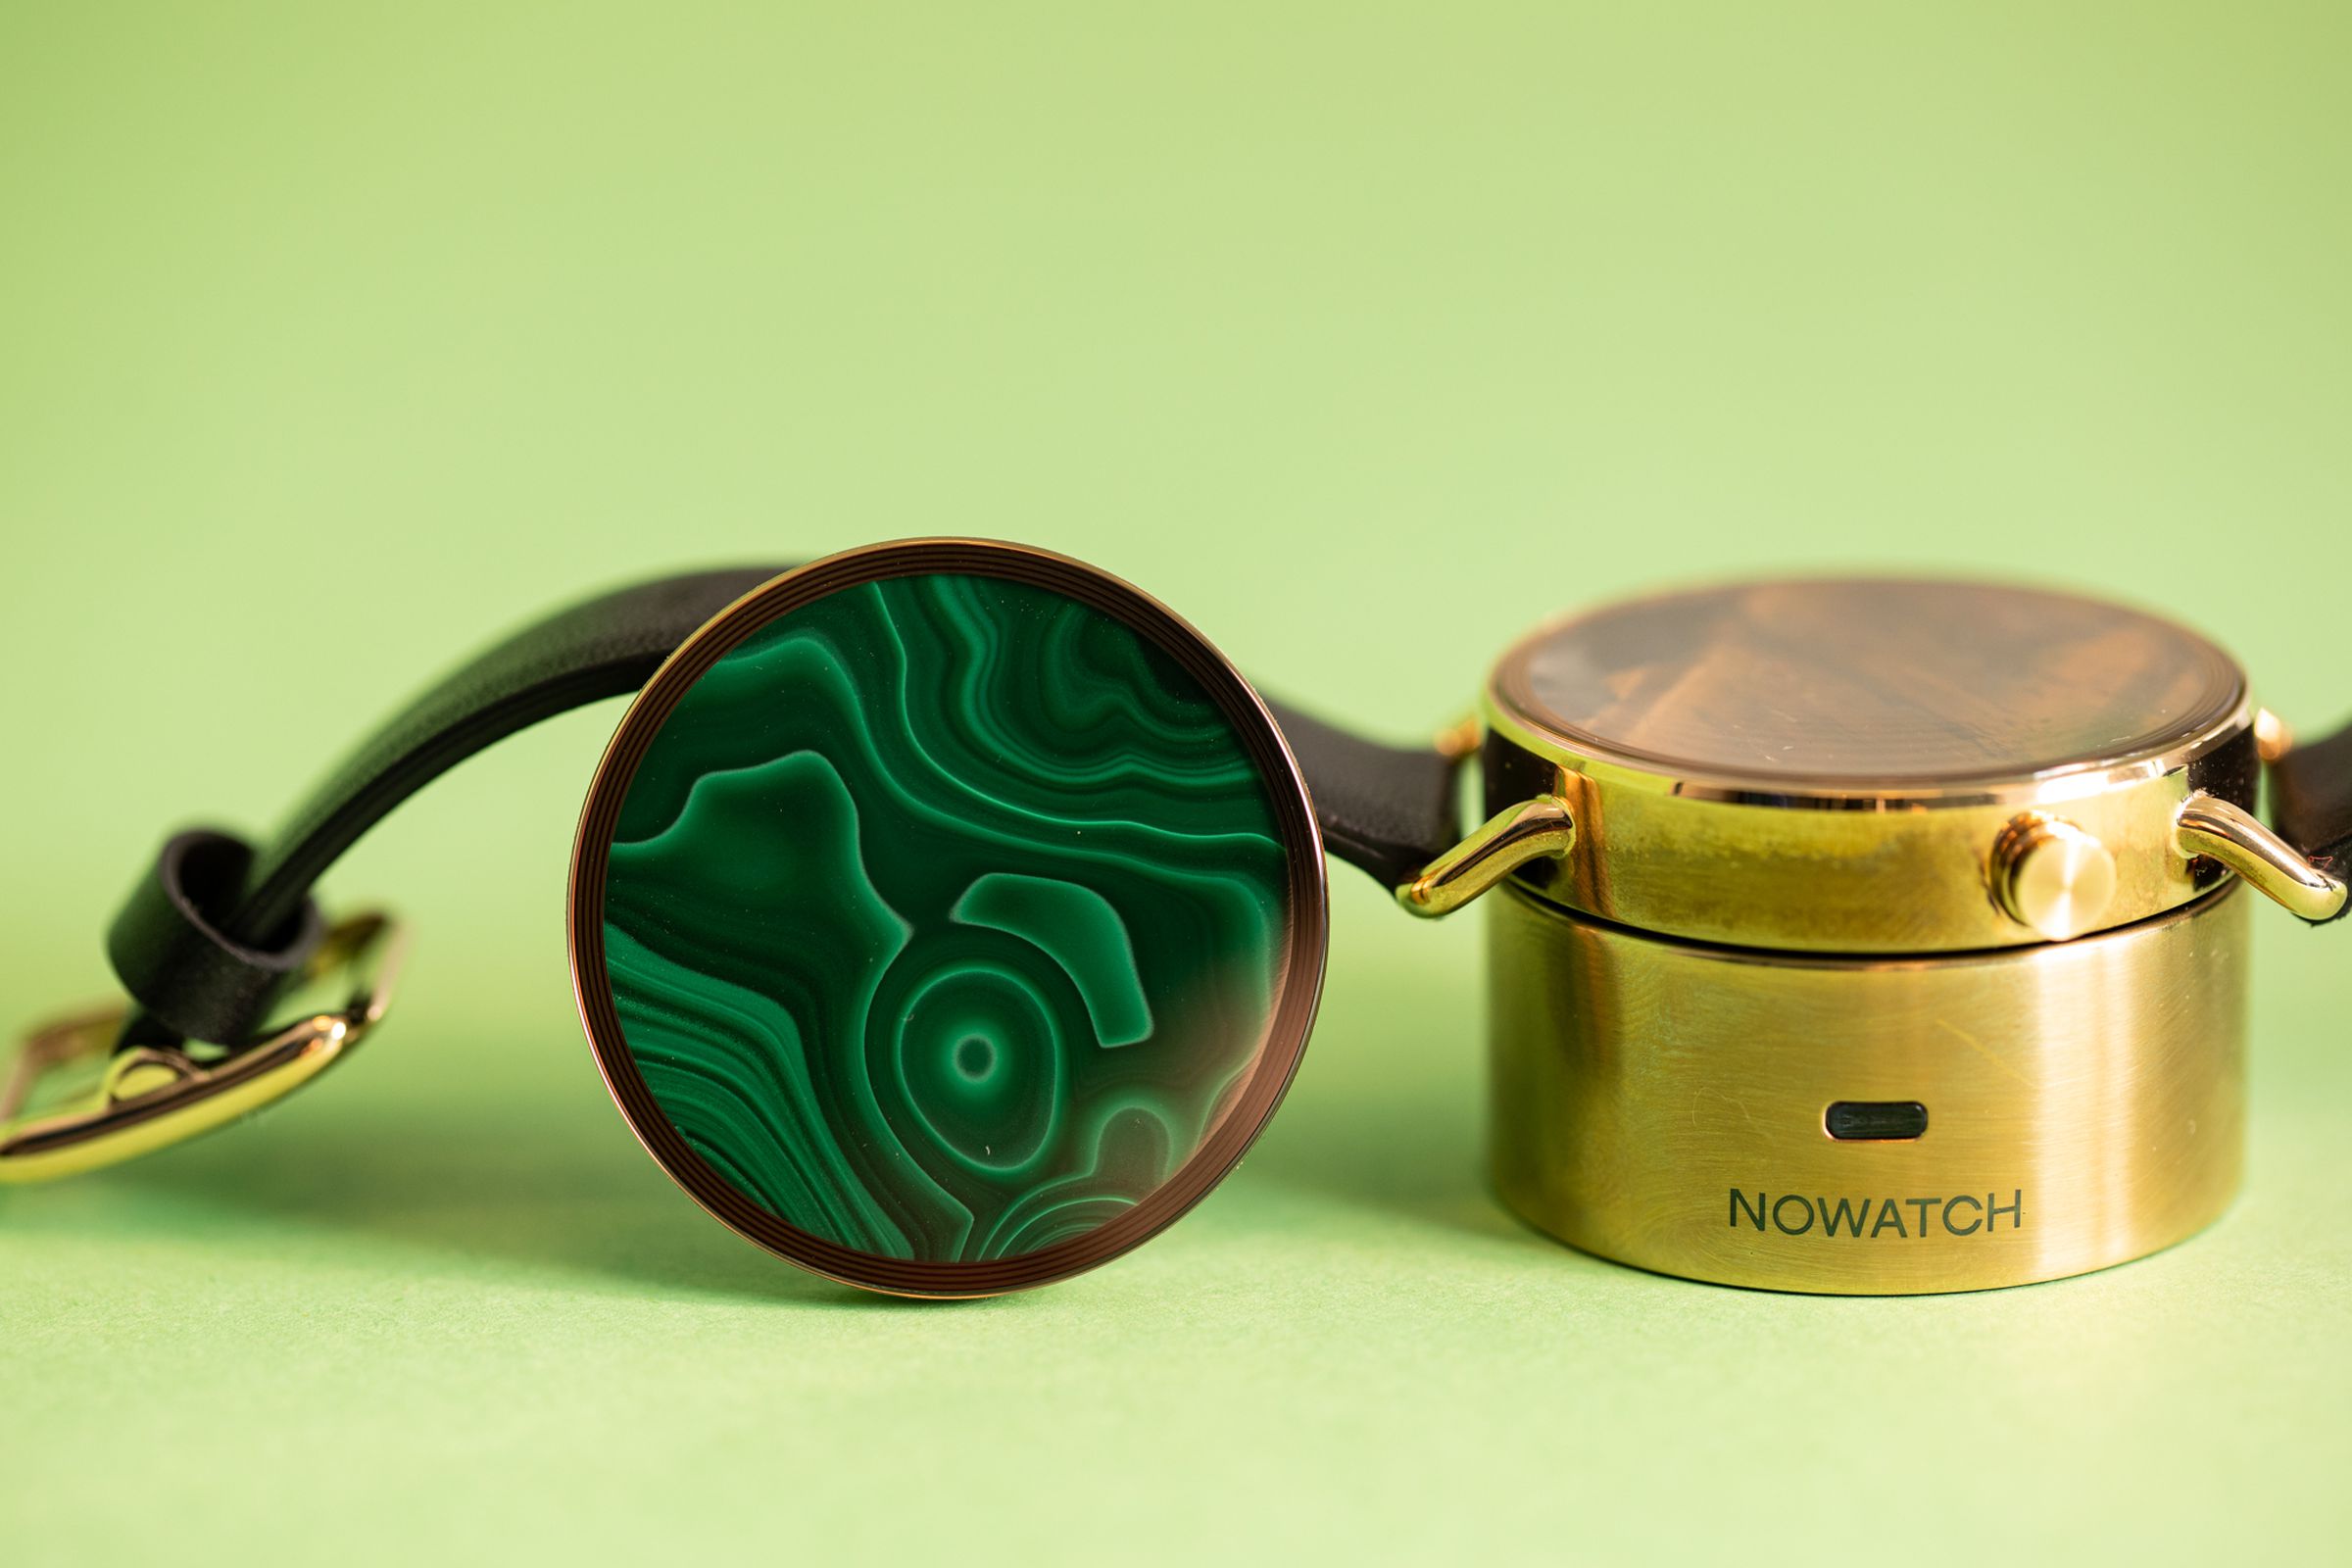 Nowatch device on its charger while an alternate agate disc is propped up next to it.